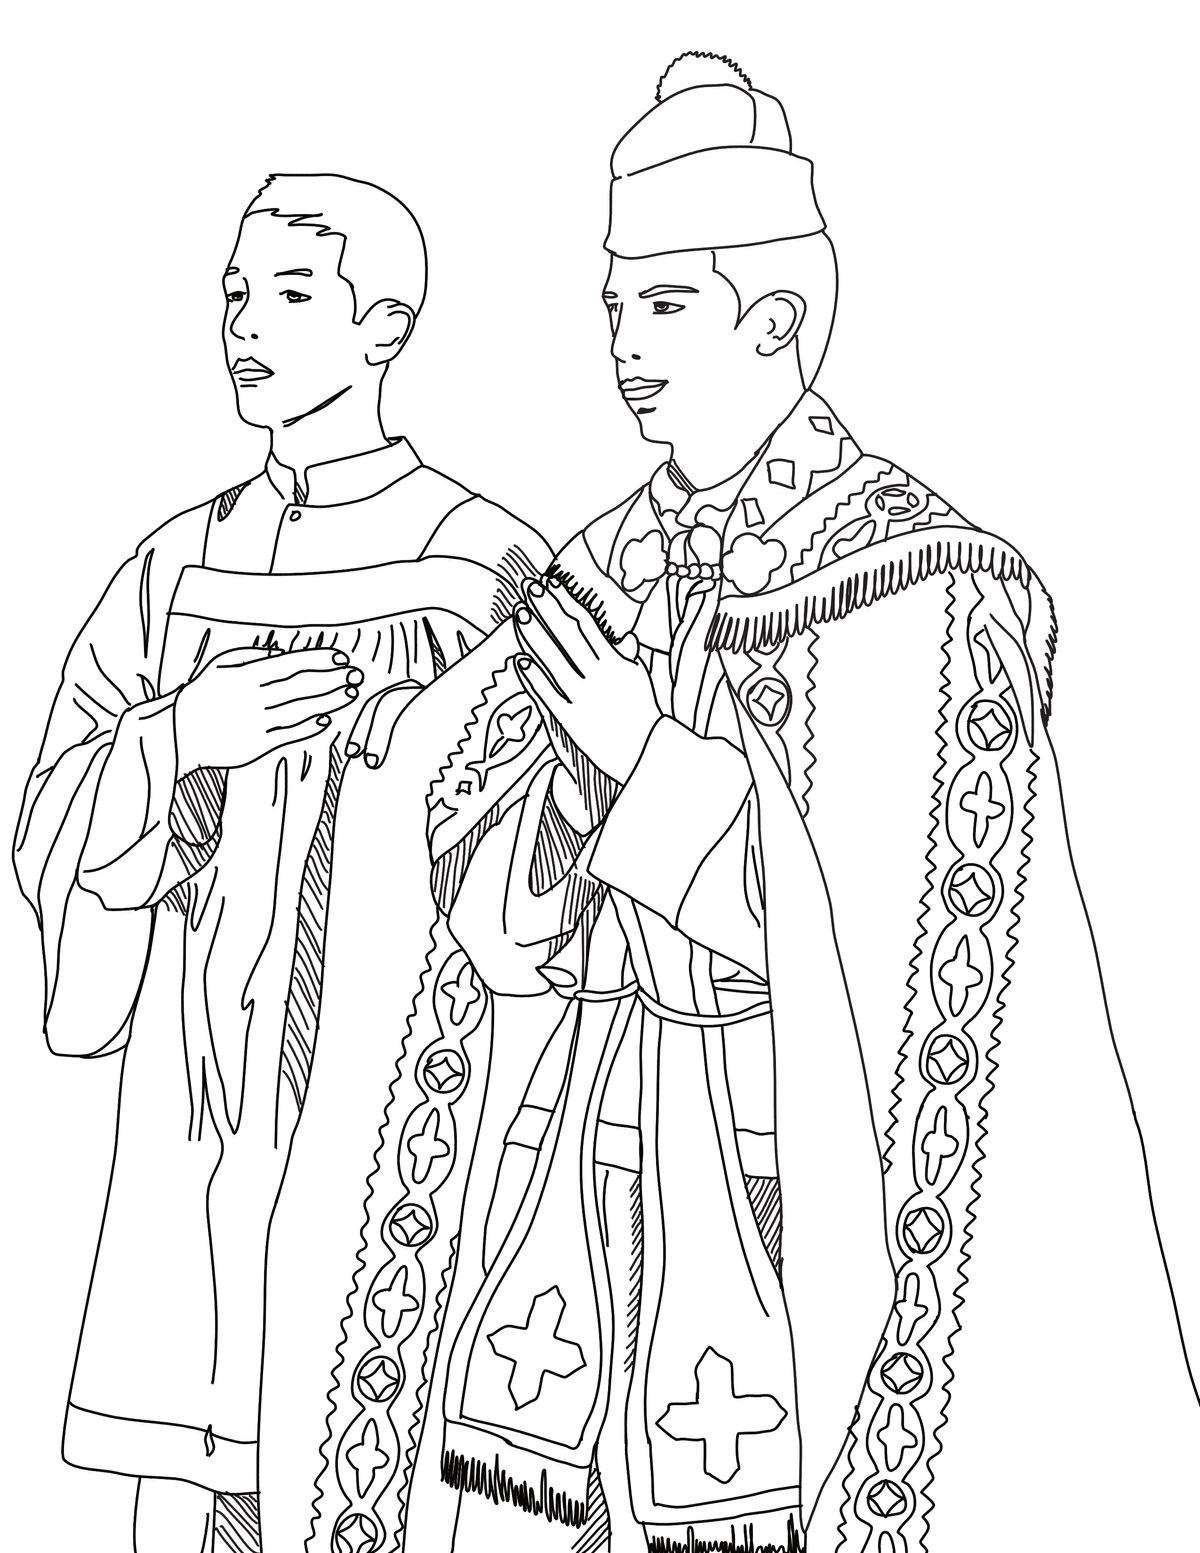 Latin Mass Procession to the Altar - Catholic Coloring Page